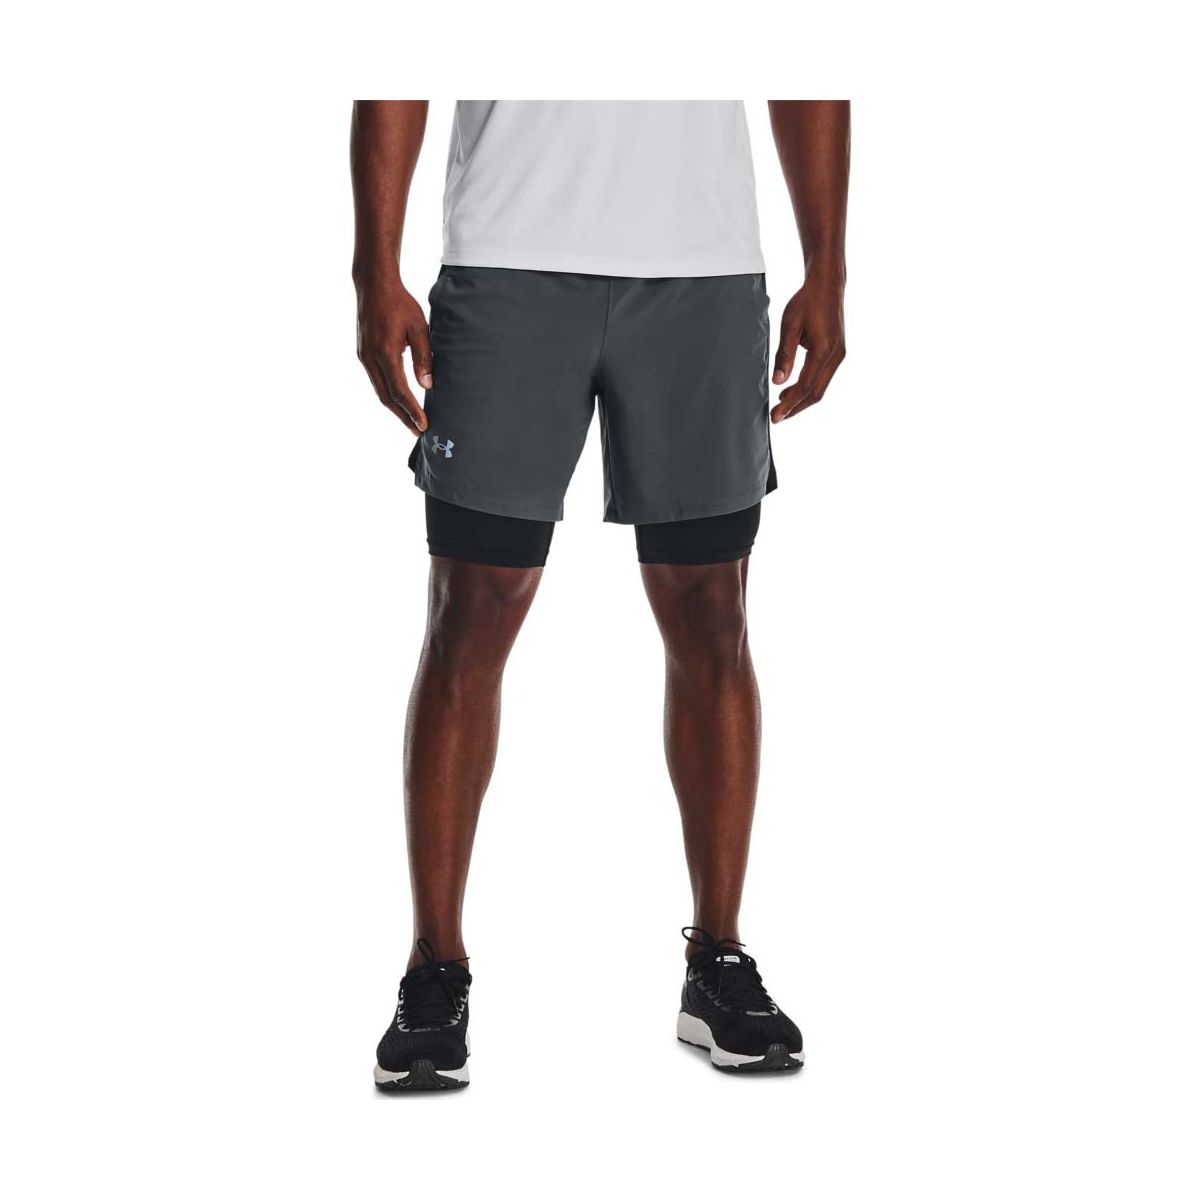 Under Armour Launch SW 2-in-1 Men's Shorts 1361497-012